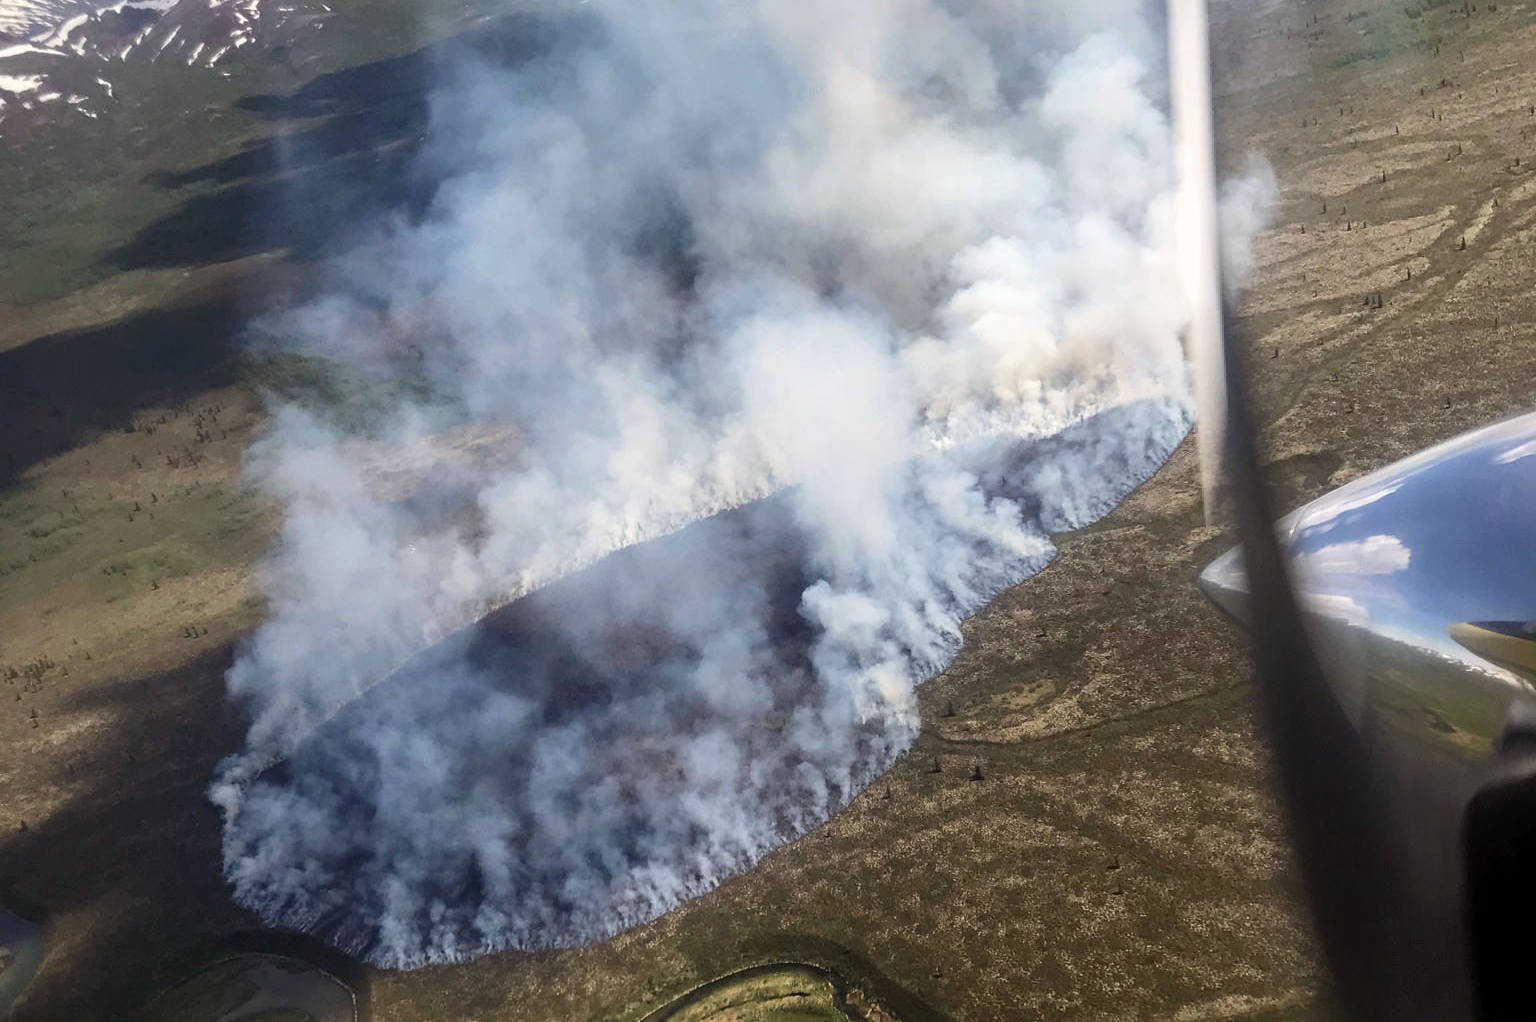 The Tustumena Lake Fire as seen from the air during the early stages of initial attack on June 6, 2019, near Clam Gulch, Alaska. (Photo by Tim Whitesell/Alaska Division of Forestry)